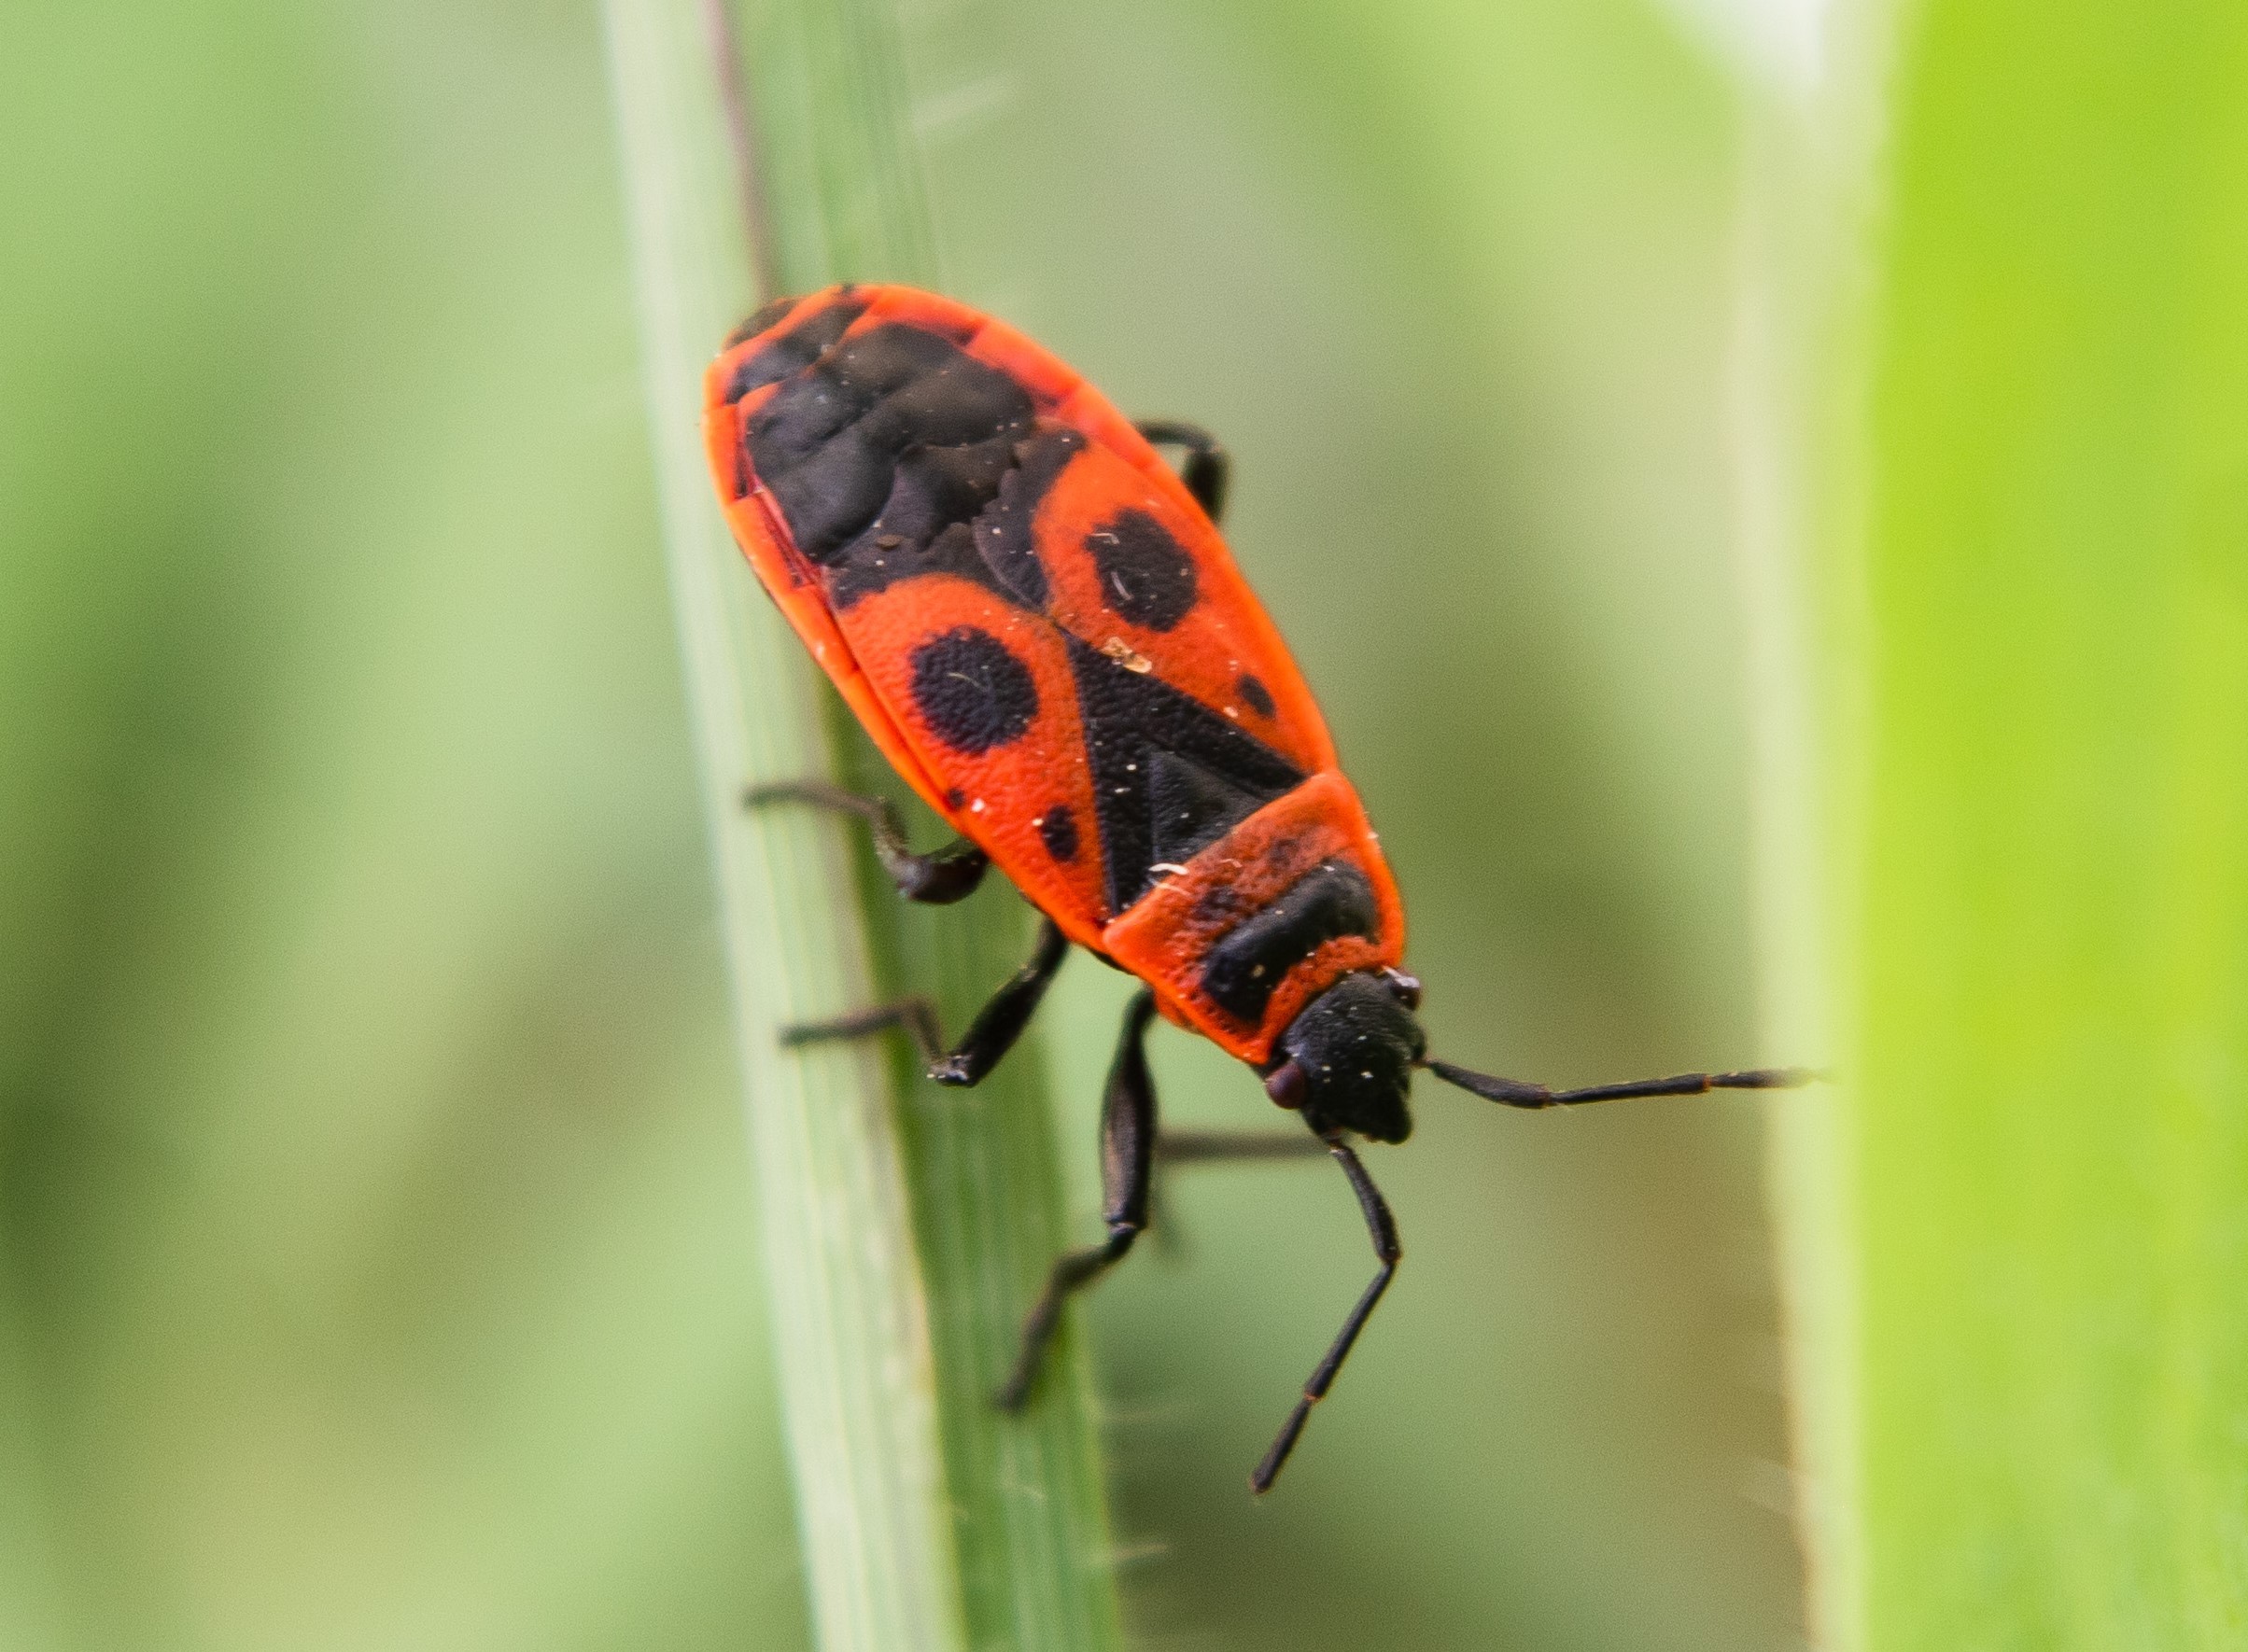 Fig. 1. Brachypterous (short-winged) adult red firebug.